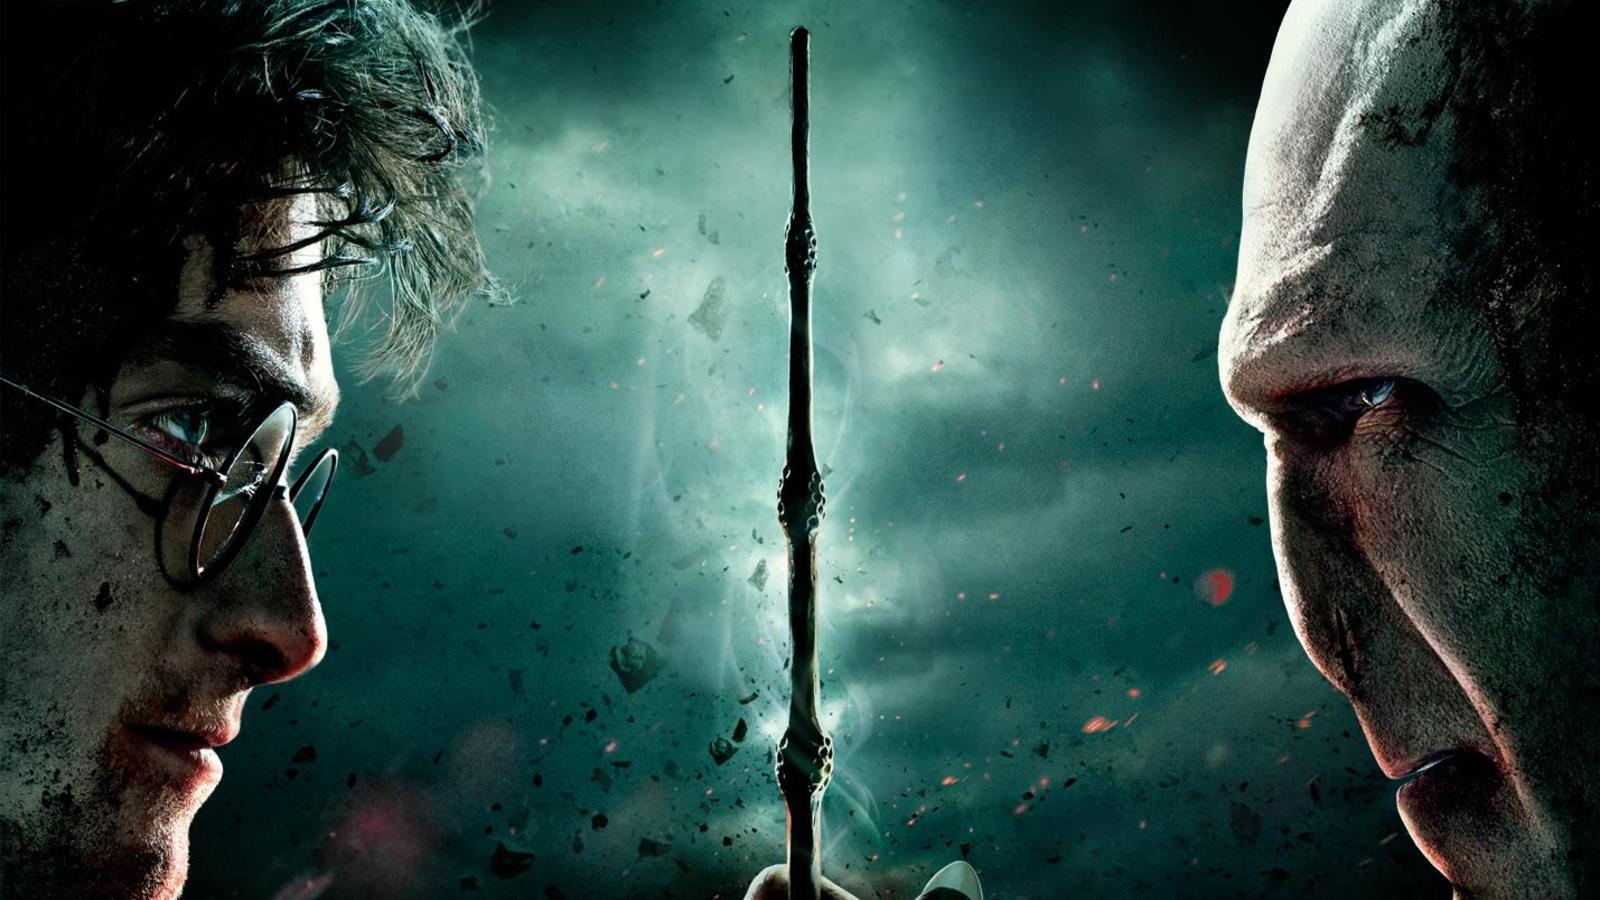  potter and lord voldemort 1600x900 16 9 back to wallpaper back home